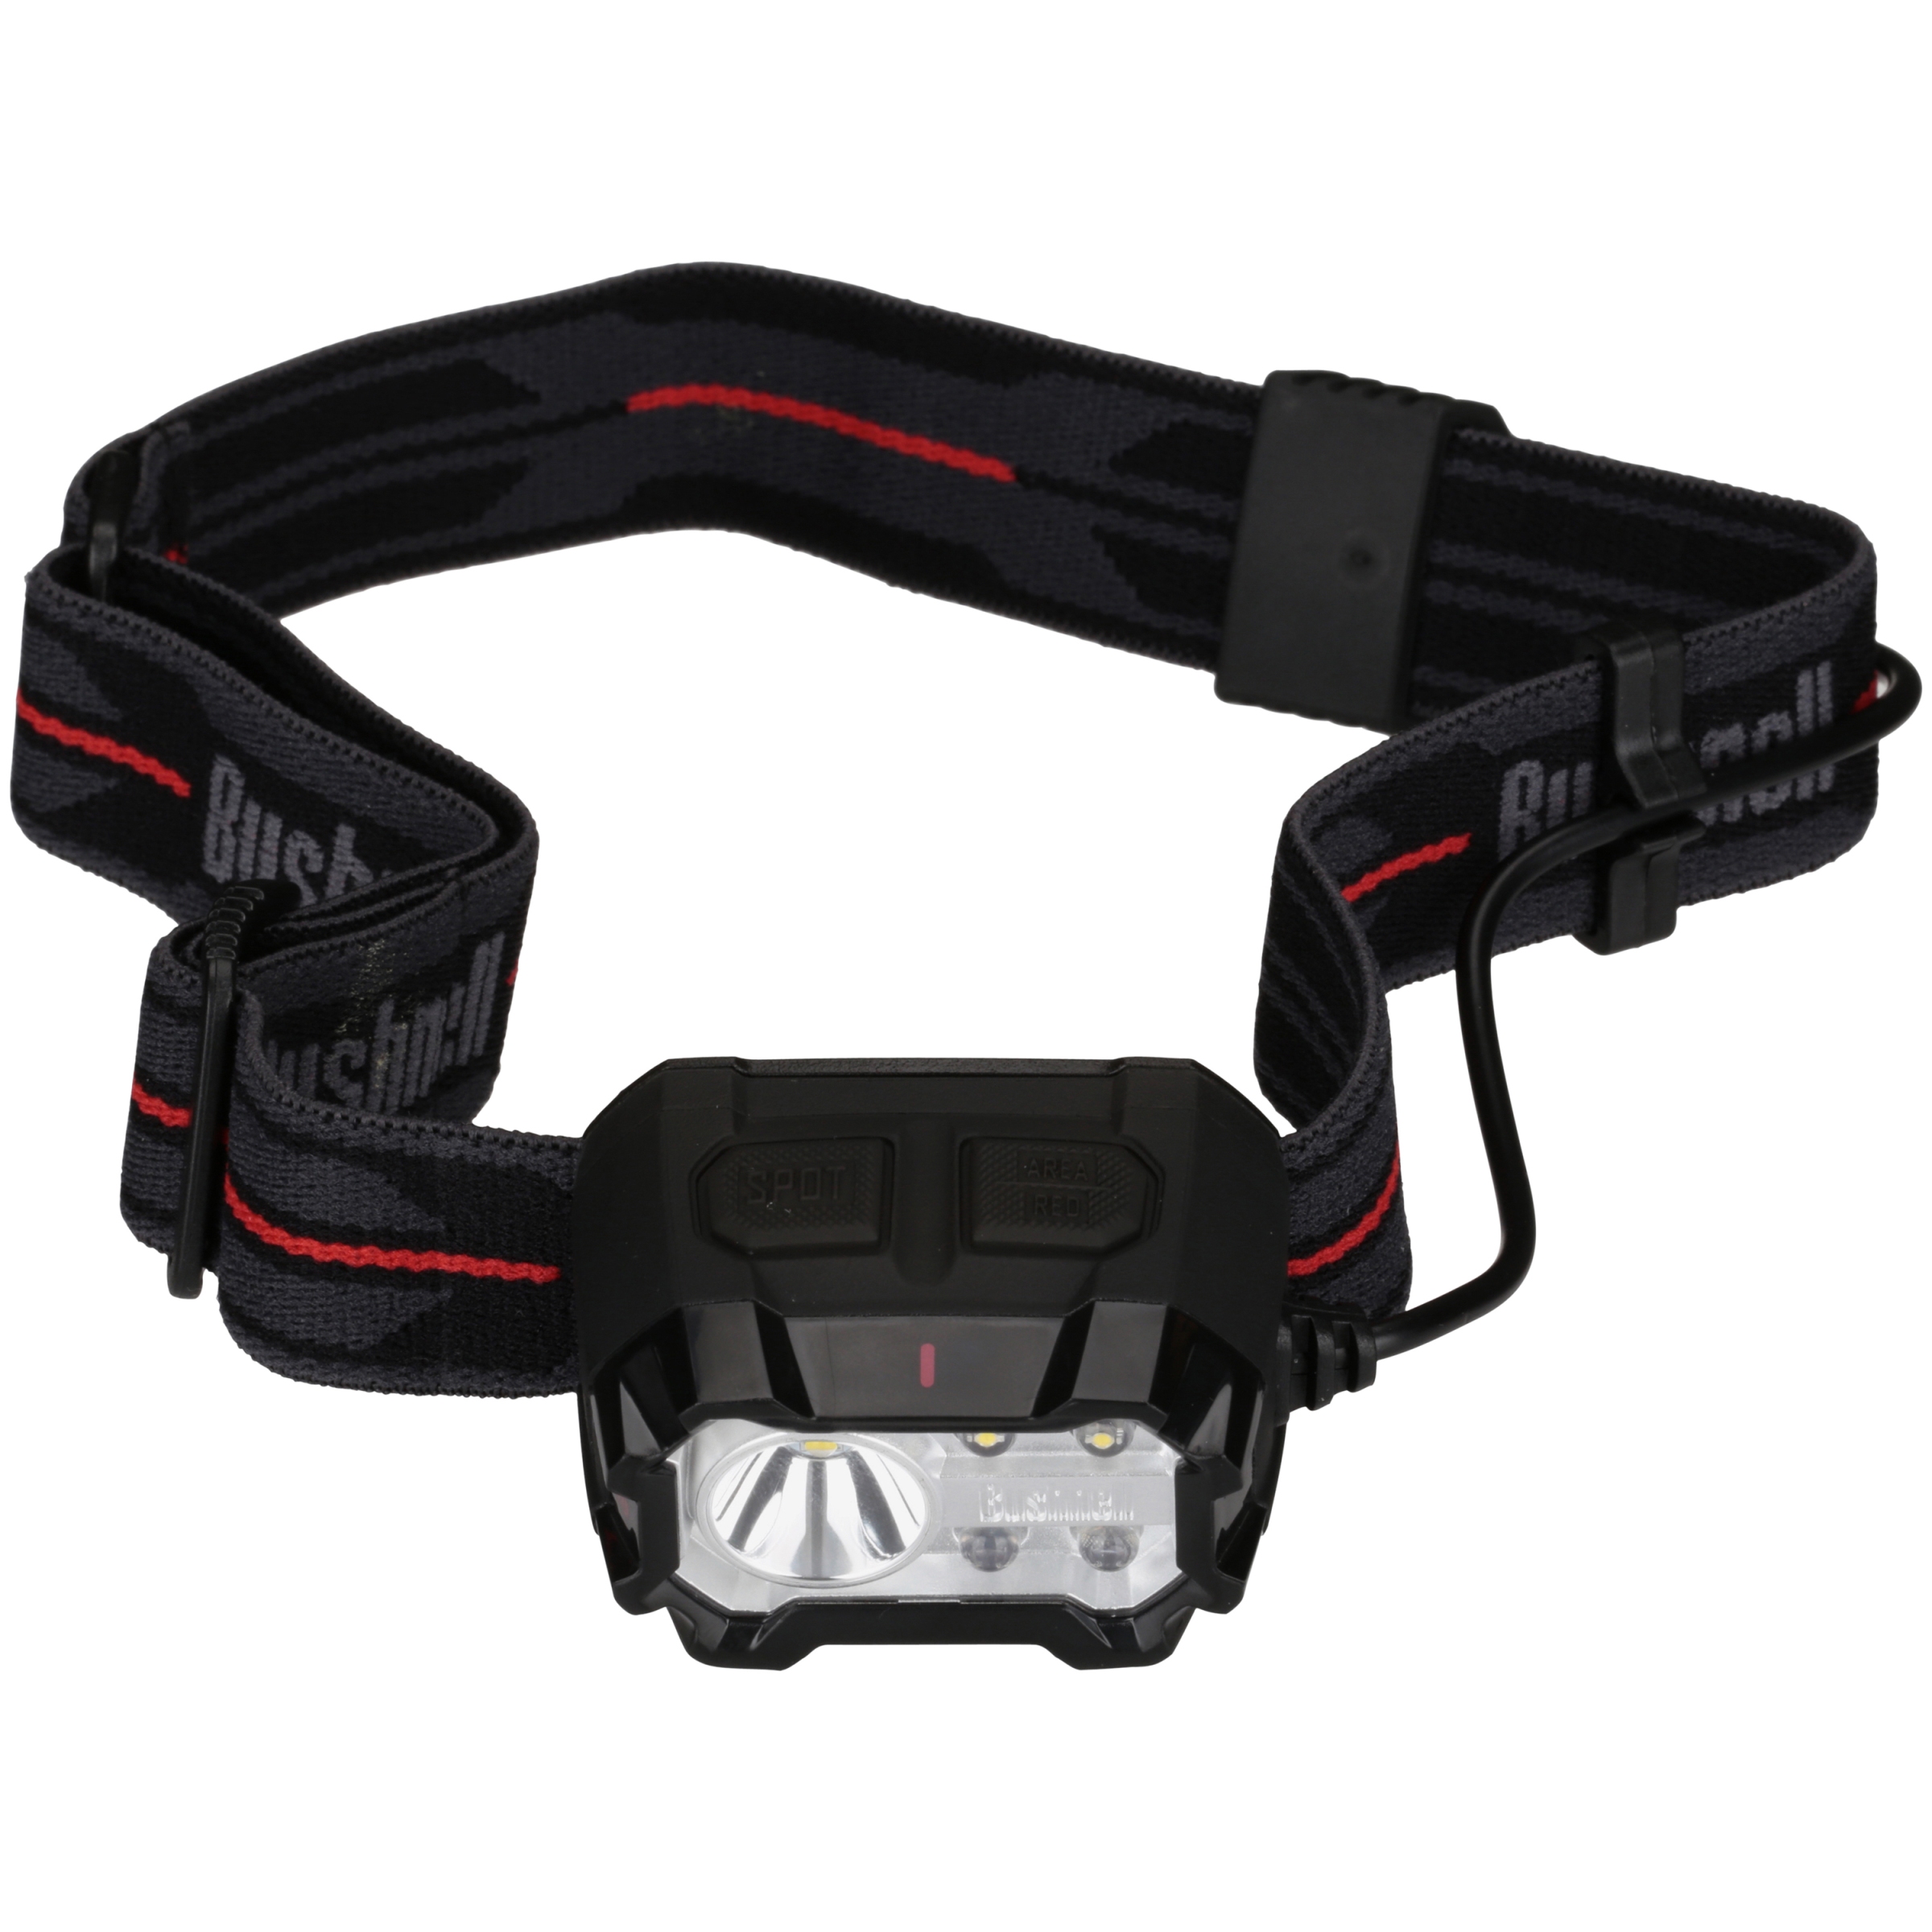 Bushnell Pro Rechargeable 300L Headlamp - image 3 of 6